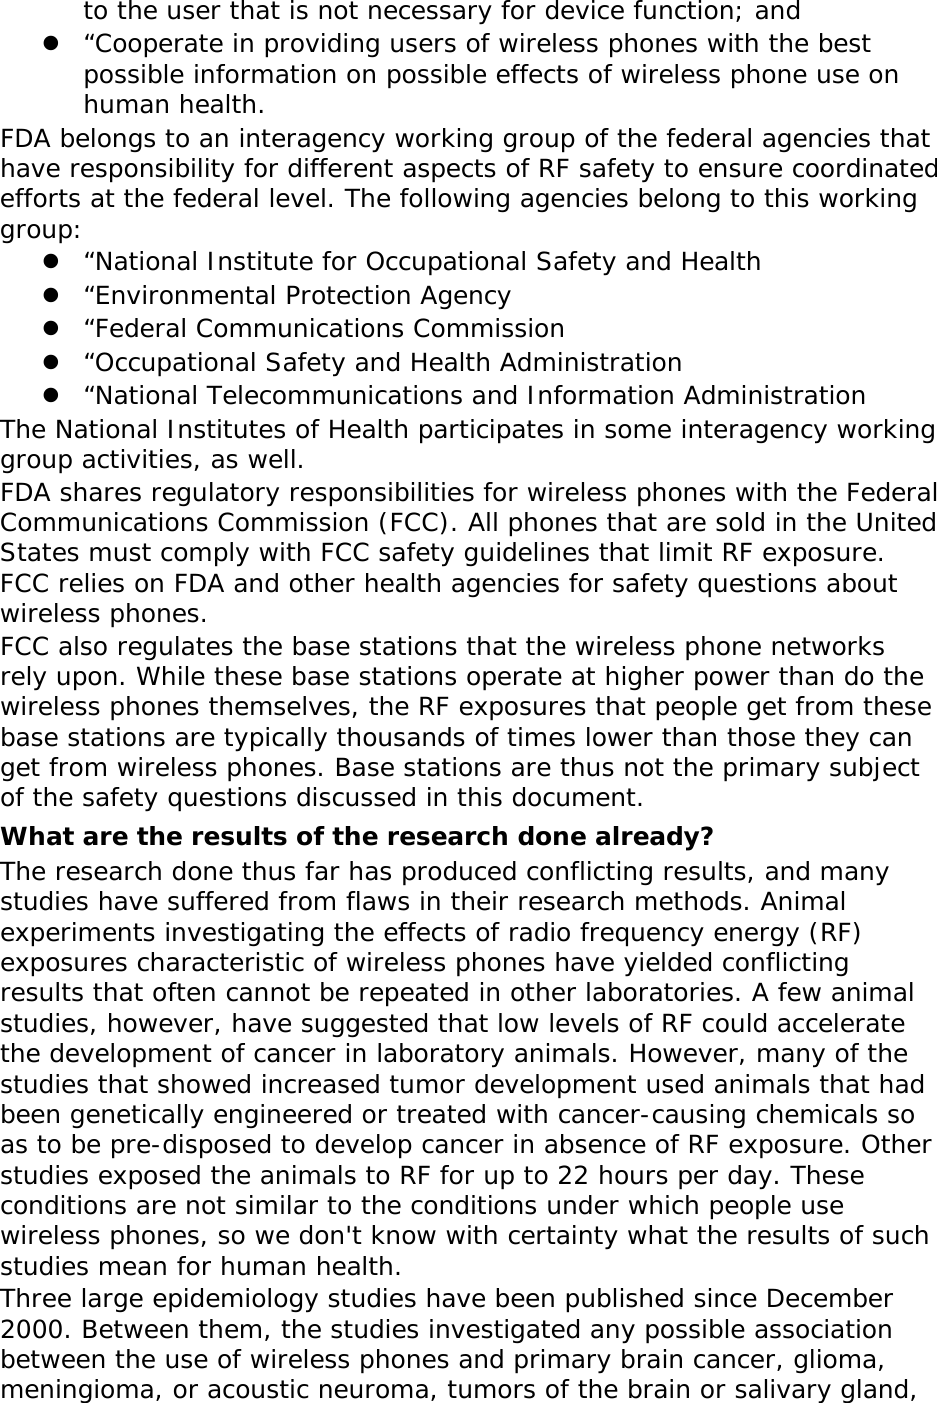 to the user that is not necessary for device function; and  “Cooperate in providing users of wireless phones with the best possible information on possible effects of wireless phone use on human health. FDA belongs to an interagency working group of the federal agencies that have responsibility for different aspects of RF safety to ensure coordinated efforts at the federal level. The following agencies belong to this working group:  “National Institute for Occupational Safety and Health  “Environmental Protection Agency  “Federal Communications Commission  “Occupational Safety and Health Administration  “National Telecommunications and Information Administration The National Institutes of Health participates in some interagency working group activities, as well. FDA shares regulatory responsibilities for wireless phones with the Federal Communications Commission (FCC). All phones that are sold in the United States must comply with FCC safety guidelines that limit RF exposure. FCC relies on FDA and other health agencies for safety questions about wireless phones. FCC also regulates the base stations that the wireless phone networks rely upon. While these base stations operate at higher power than do the wireless phones themselves, the RF exposures that people get from these base stations are typically thousands of times lower than those they can get from wireless phones. Base stations are thus not the primary subject of the safety questions discussed in this document. What are the results of the research done already? The research done thus far has produced conflicting results, and many studies have suffered from flaws in their research methods. Animal experiments investigating the effects of radio frequency energy (RF) exposures characteristic of wireless phones have yielded conflicting results that often cannot be repeated in other laboratories. A few animal studies, however, have suggested that low levels of RF could accelerate the development of cancer in laboratory animals. However, many of the studies that showed increased tumor development used animals that had been genetically engineered or treated with cancer-causing chemicals so as to be pre-disposed to develop cancer in absence of RF exposure. Other studies exposed the animals to RF for up to 22 hours per day. These conditions are not similar to the conditions under which people use wireless phones, so we don&apos;t know with certainty what the results of such studies mean for human health. Three large epidemiology studies have been published since December 2000. Between them, the studies investigated any possible association between the use of wireless phones and primary brain cancer, glioma, meningioma, or acoustic neuroma, tumors of the brain or salivary gland, 